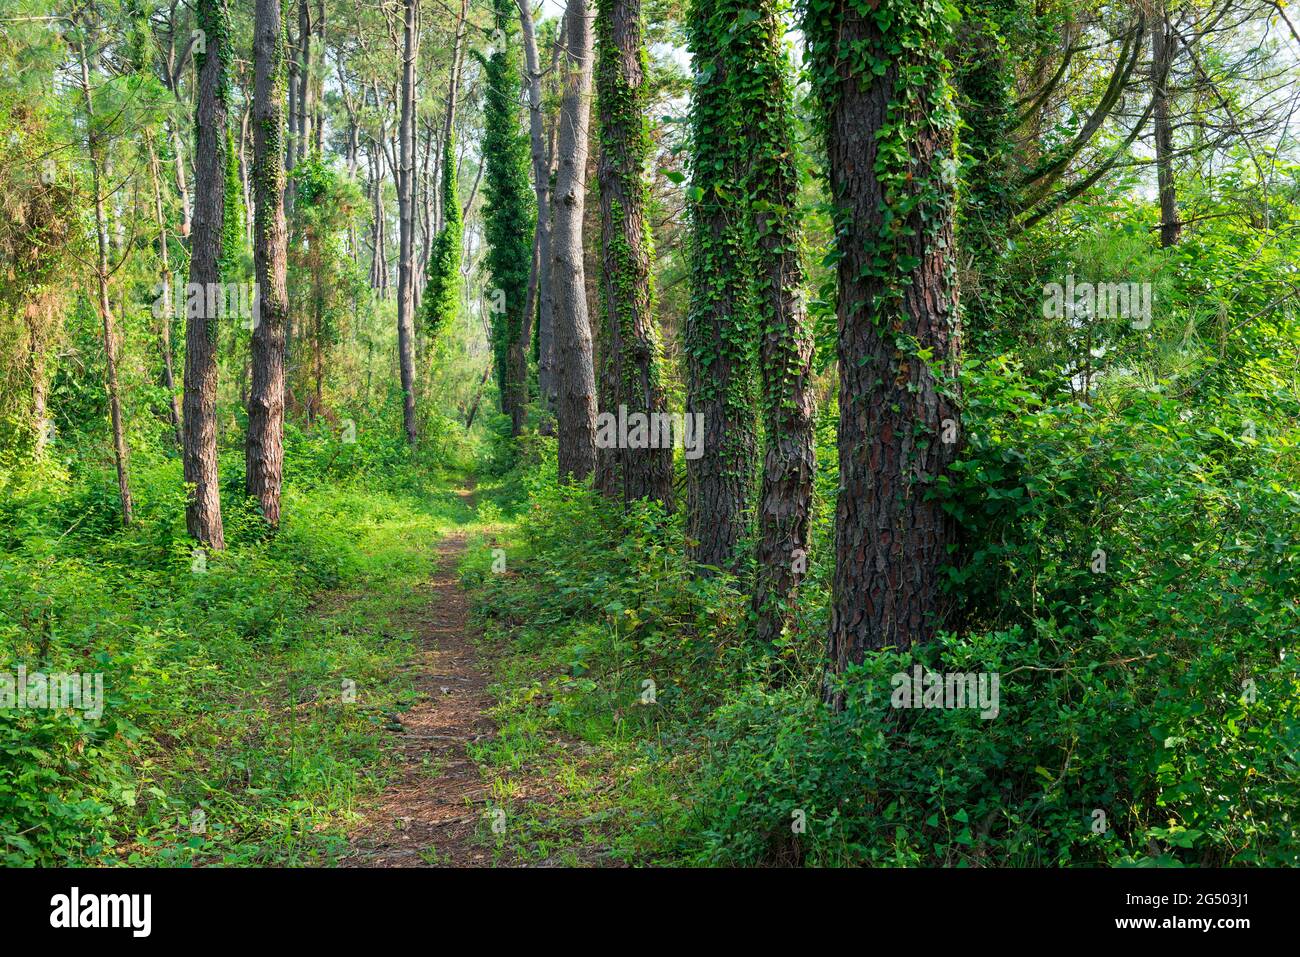 Tree trunks in a mixed forest covered with ivy Stock Photo